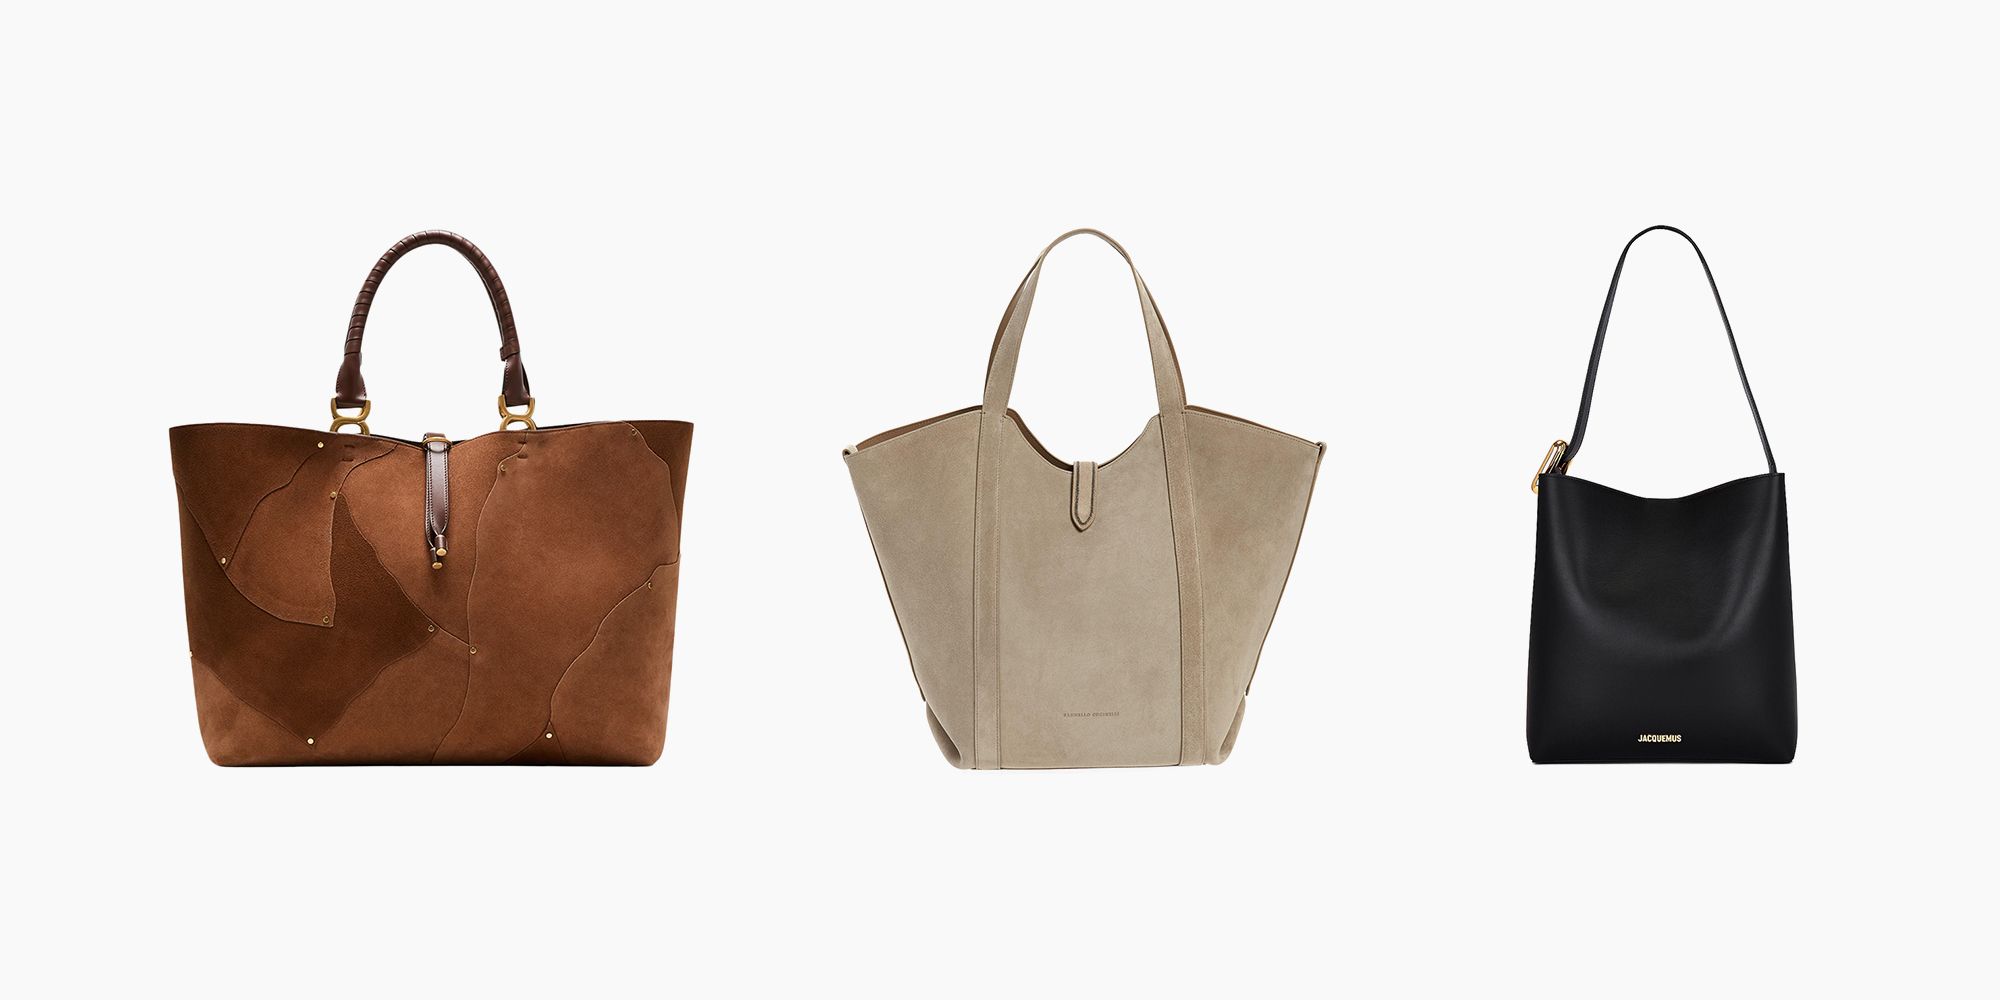 22 Best Designer Tote Bags That Do It All